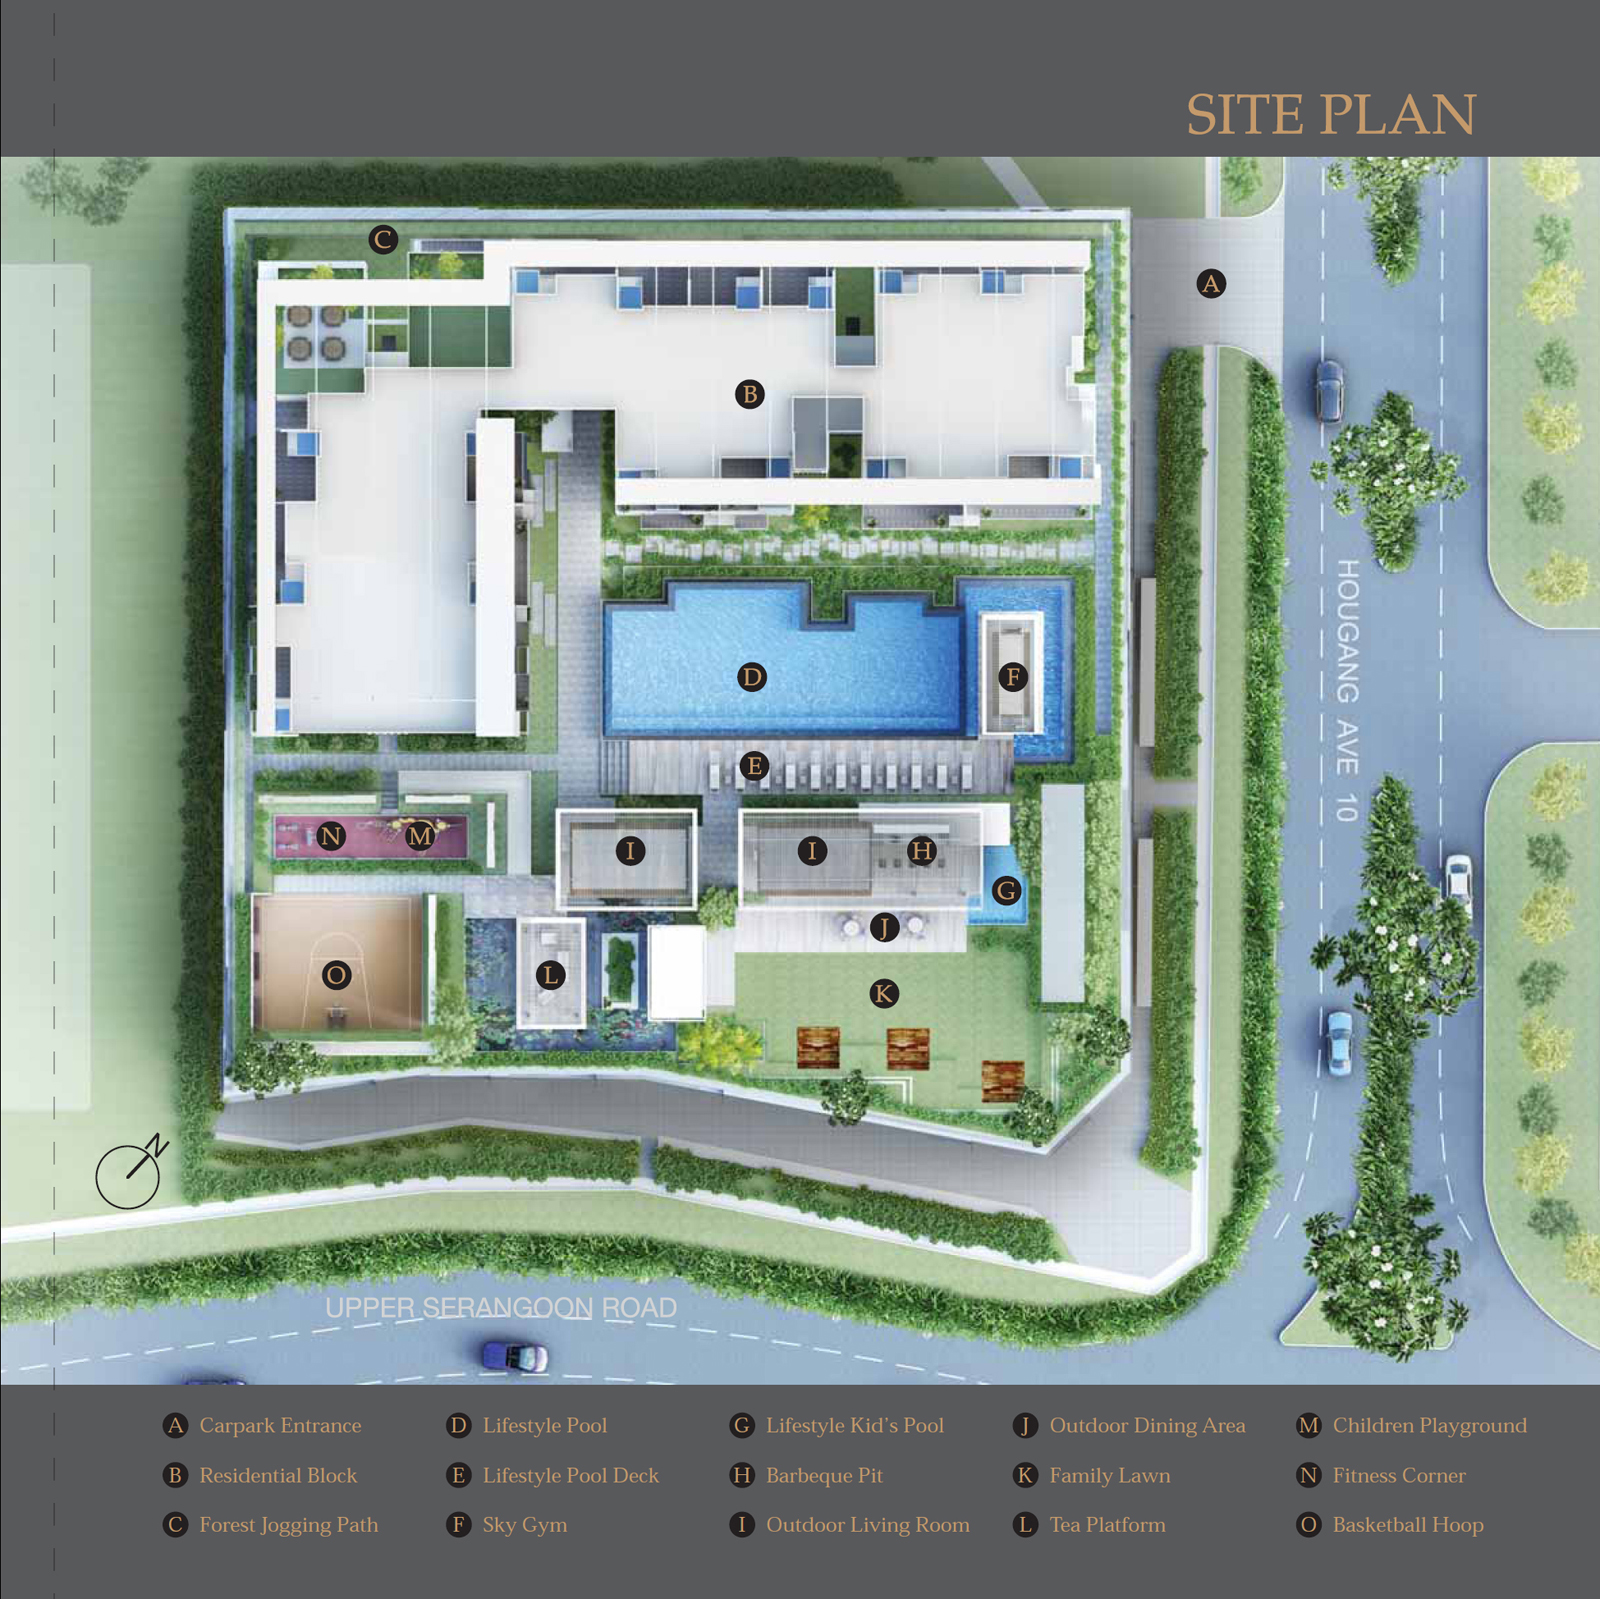 The Midtown Residences Site Plan Layout